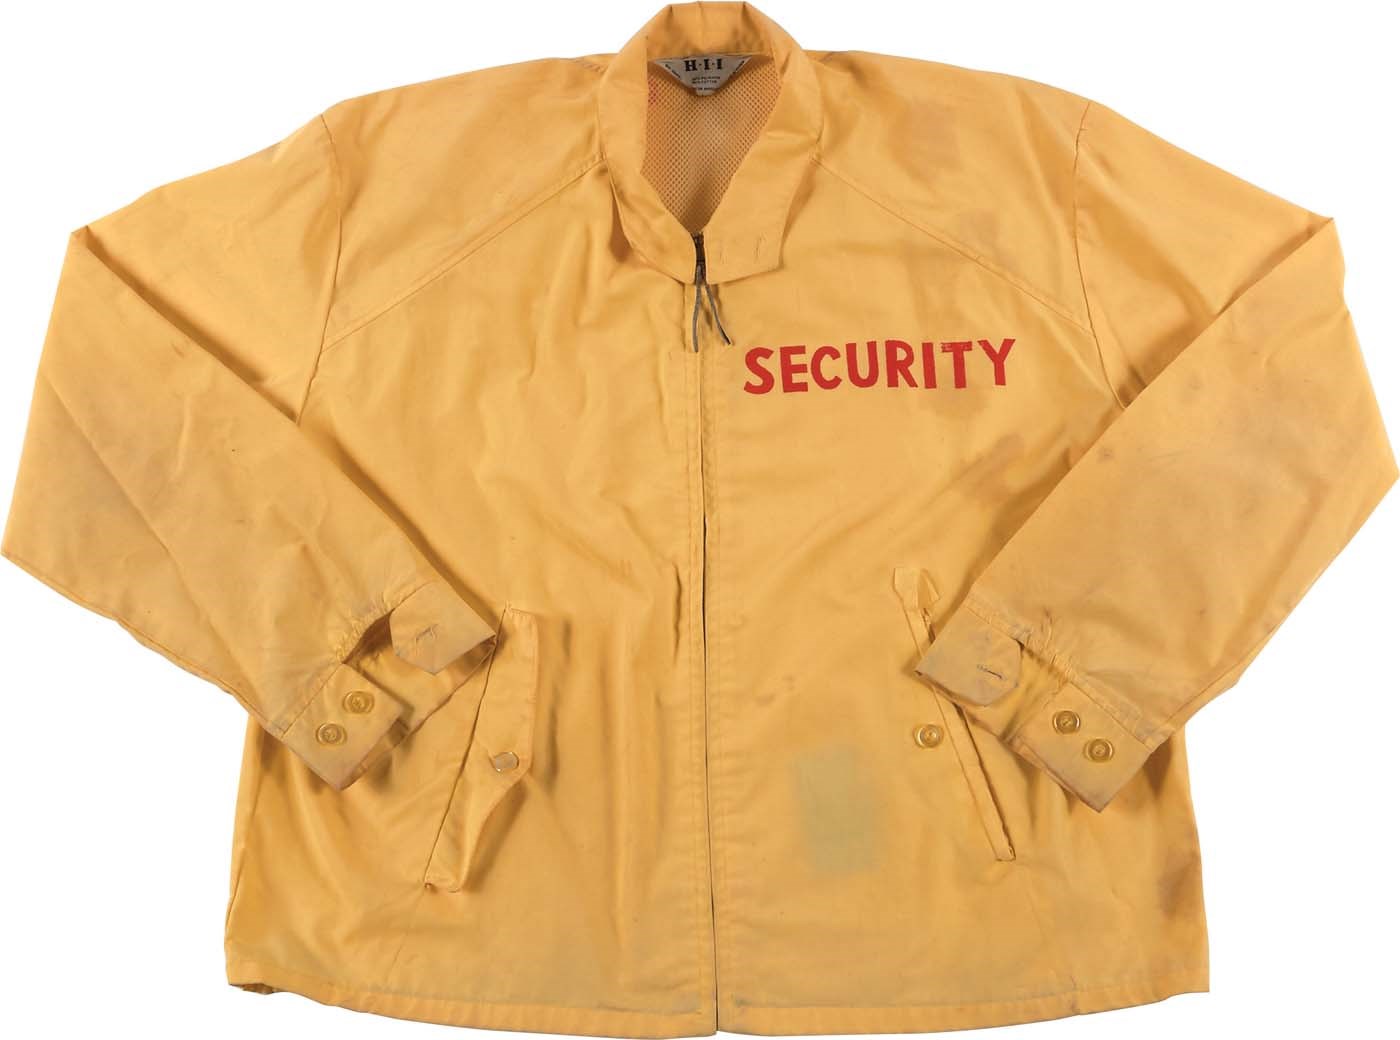 - 1969 Woodstock Security Jacket with Provenance